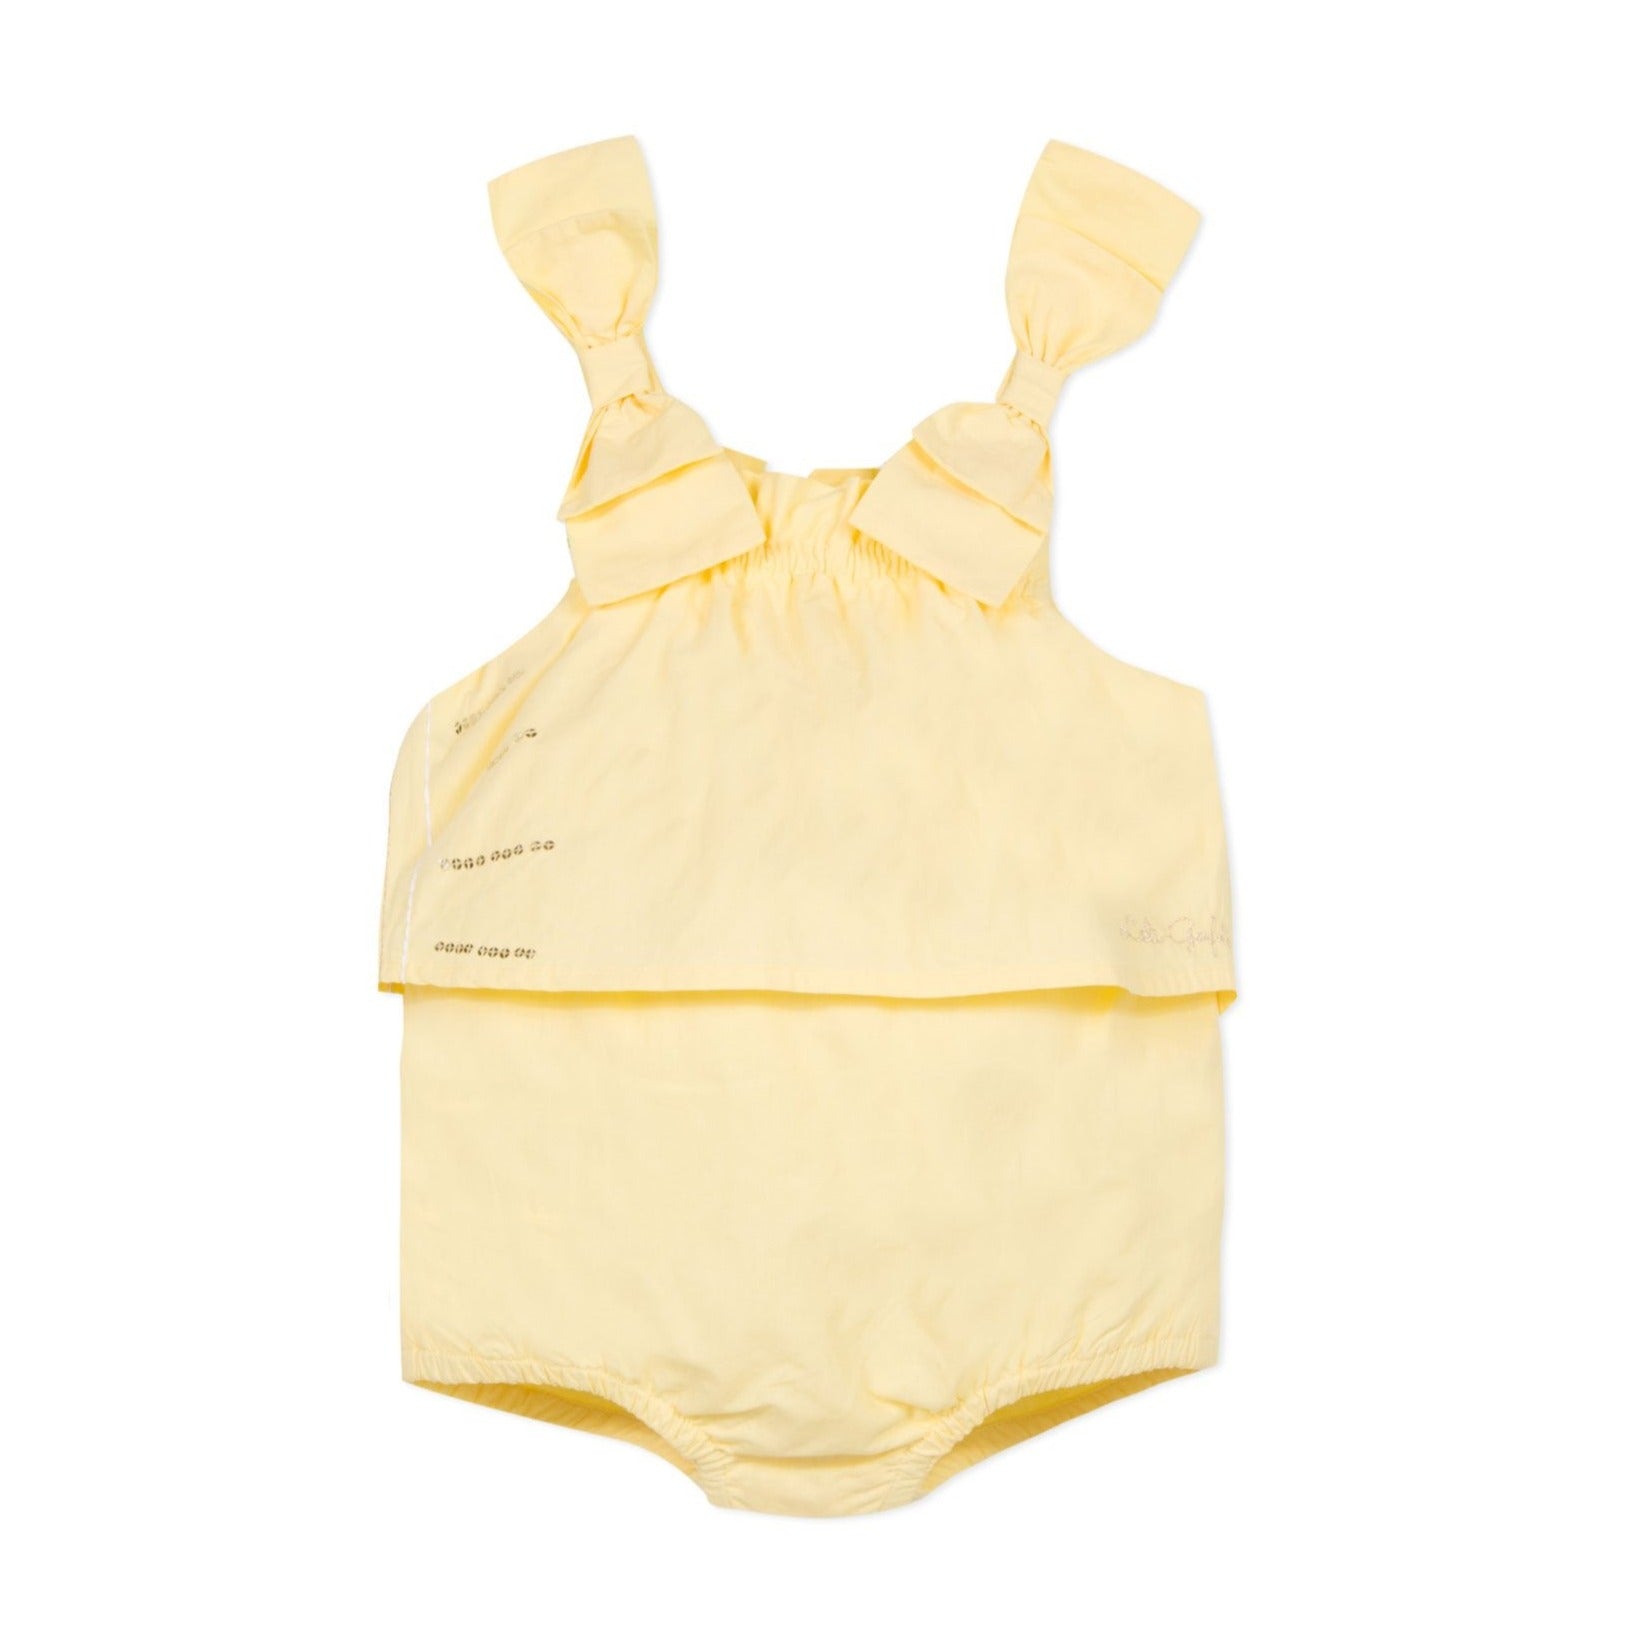 Luxury Baby Girl Romper by Lili Gaufrette at Bonjour Baby Baskets